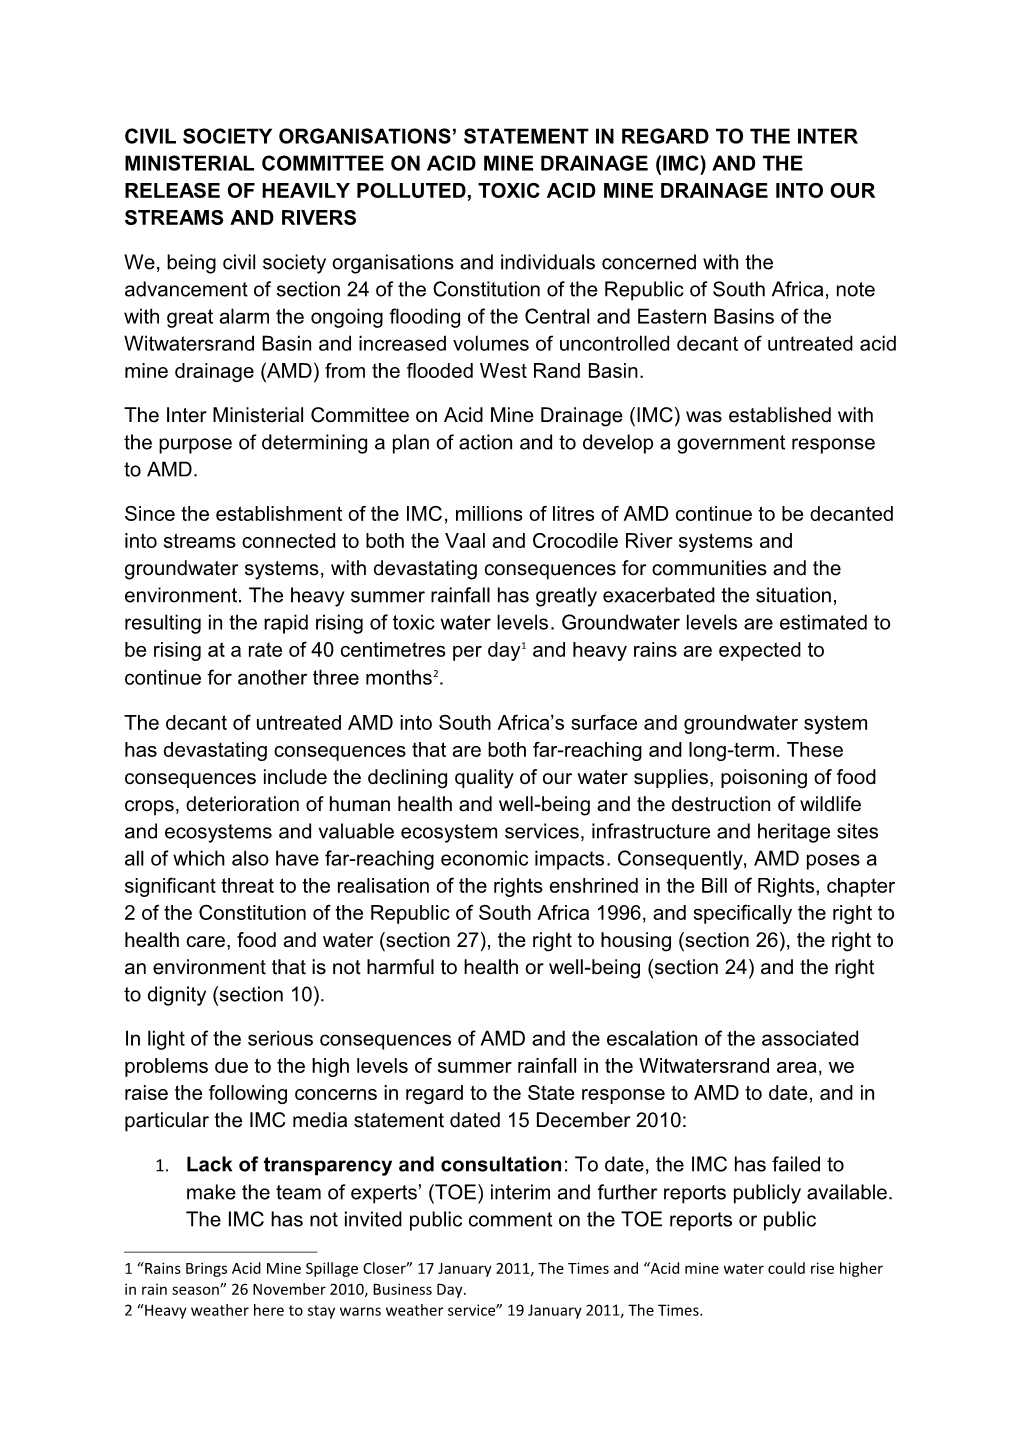 Civil Society Organisations Statement in Regard to the Interministerial Committee on Acid